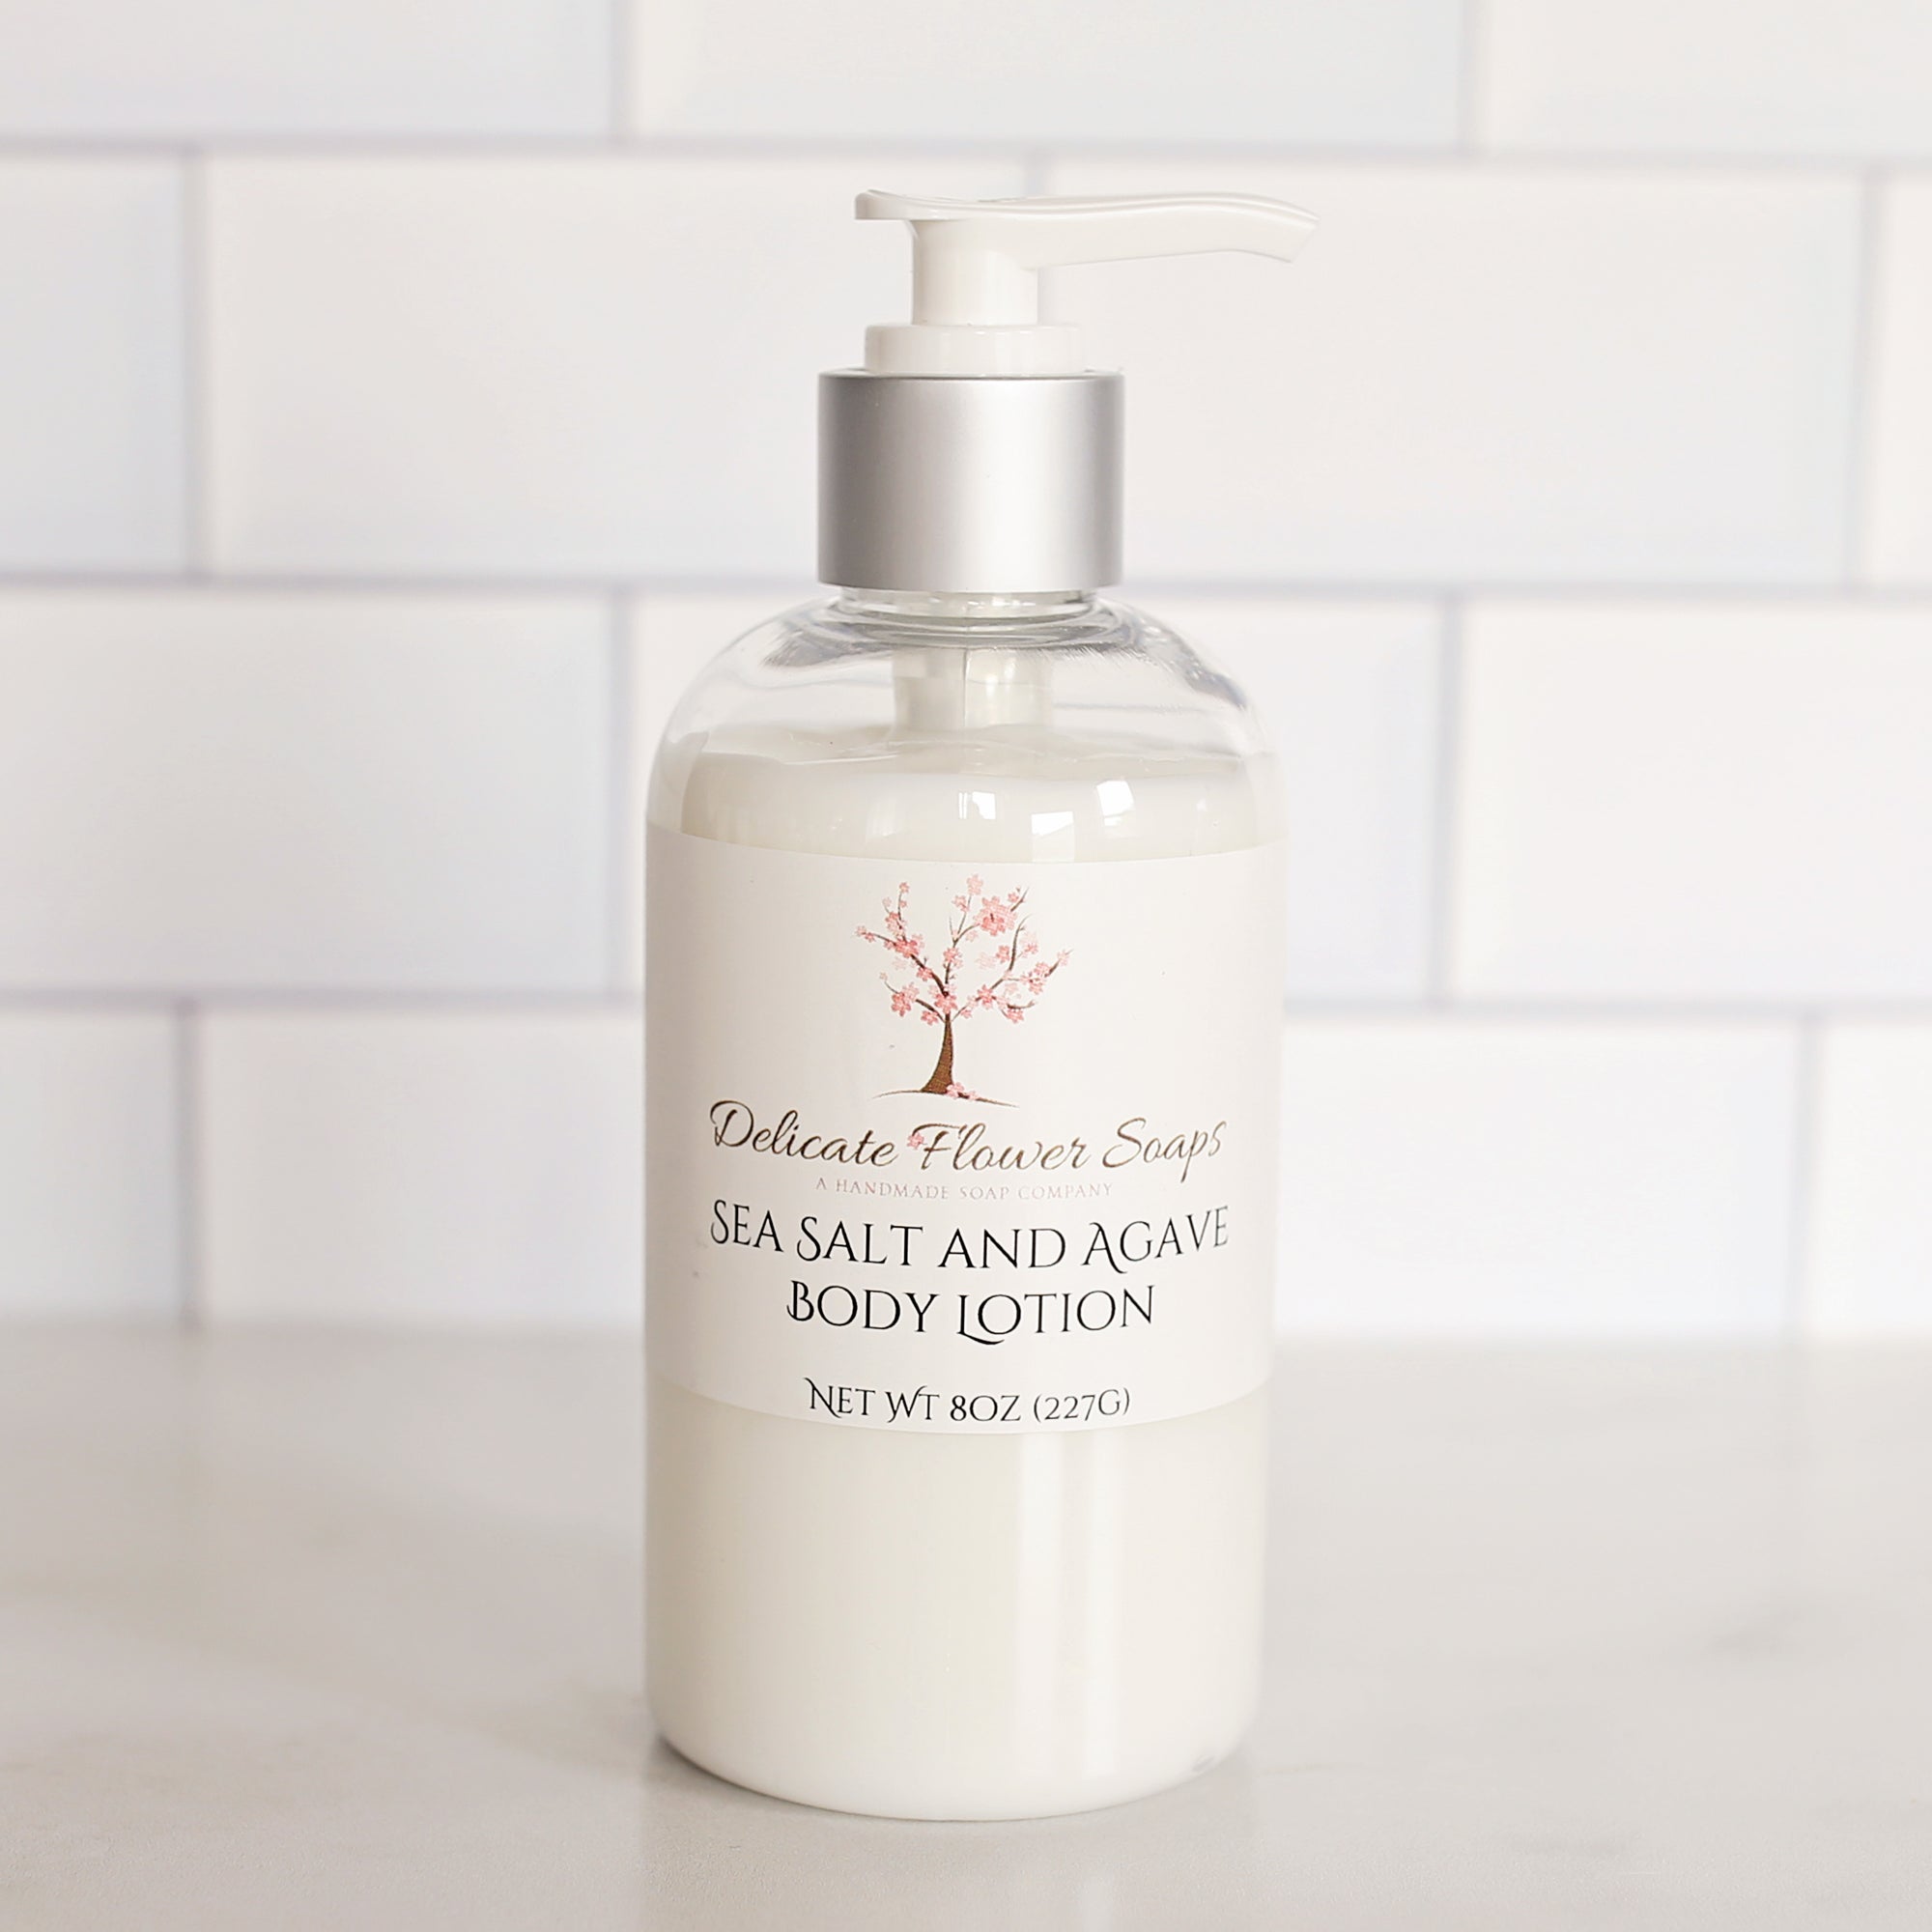 Sea Salt and Agave Body Lotion